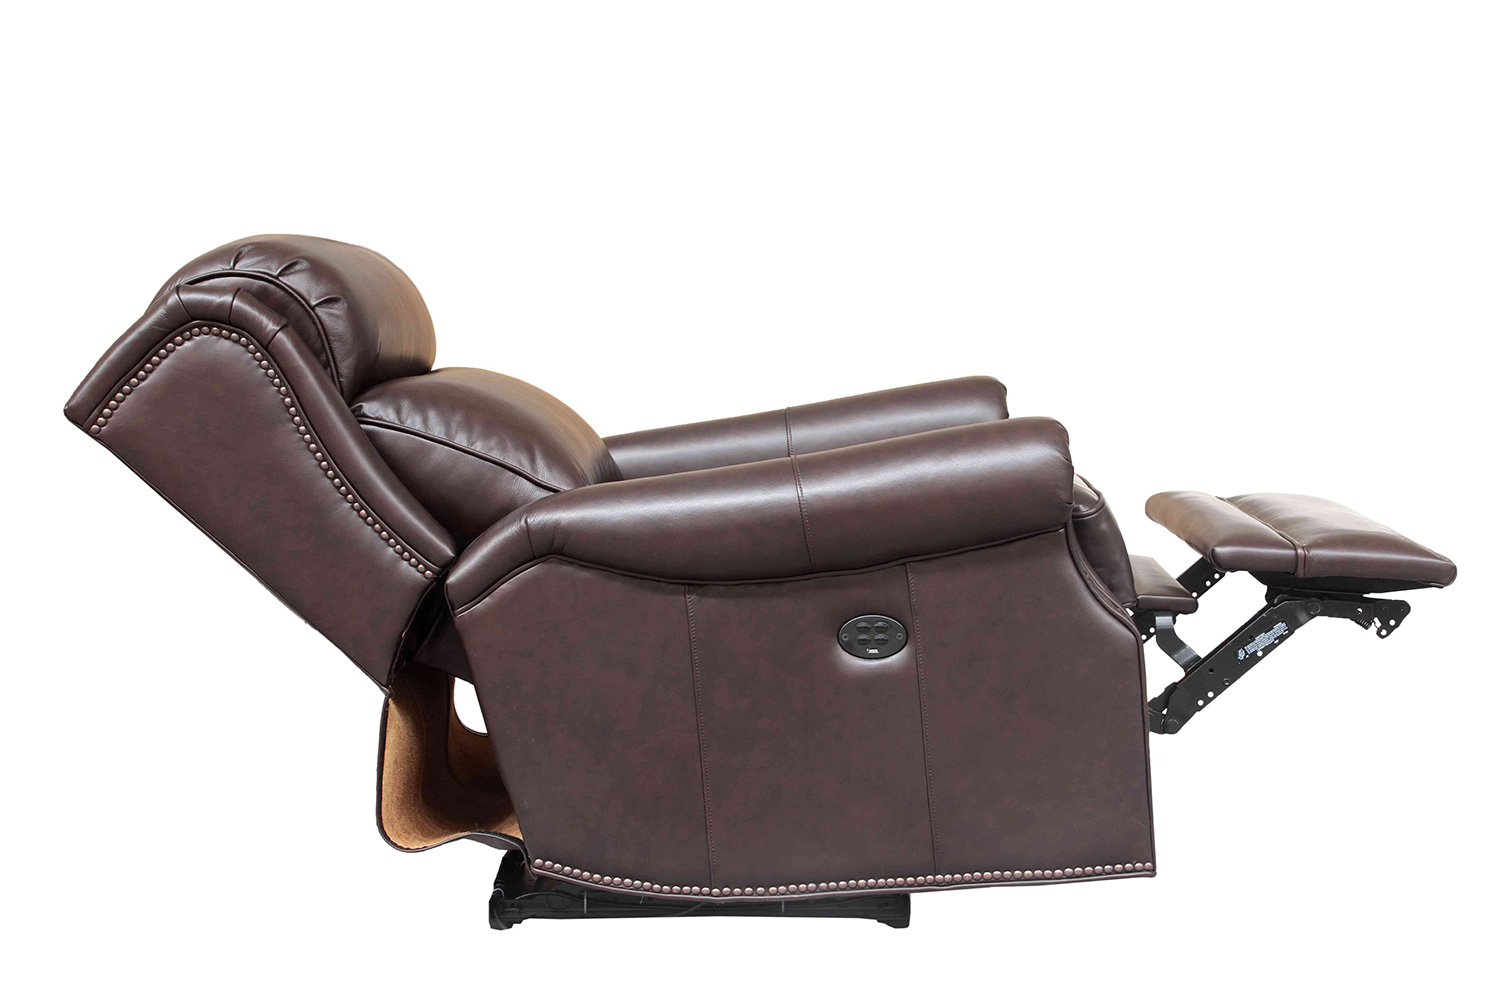 Barcalounger Southington Power Recliner Chair with Power Head Rest - Shoreham Dark Umber/All Leather